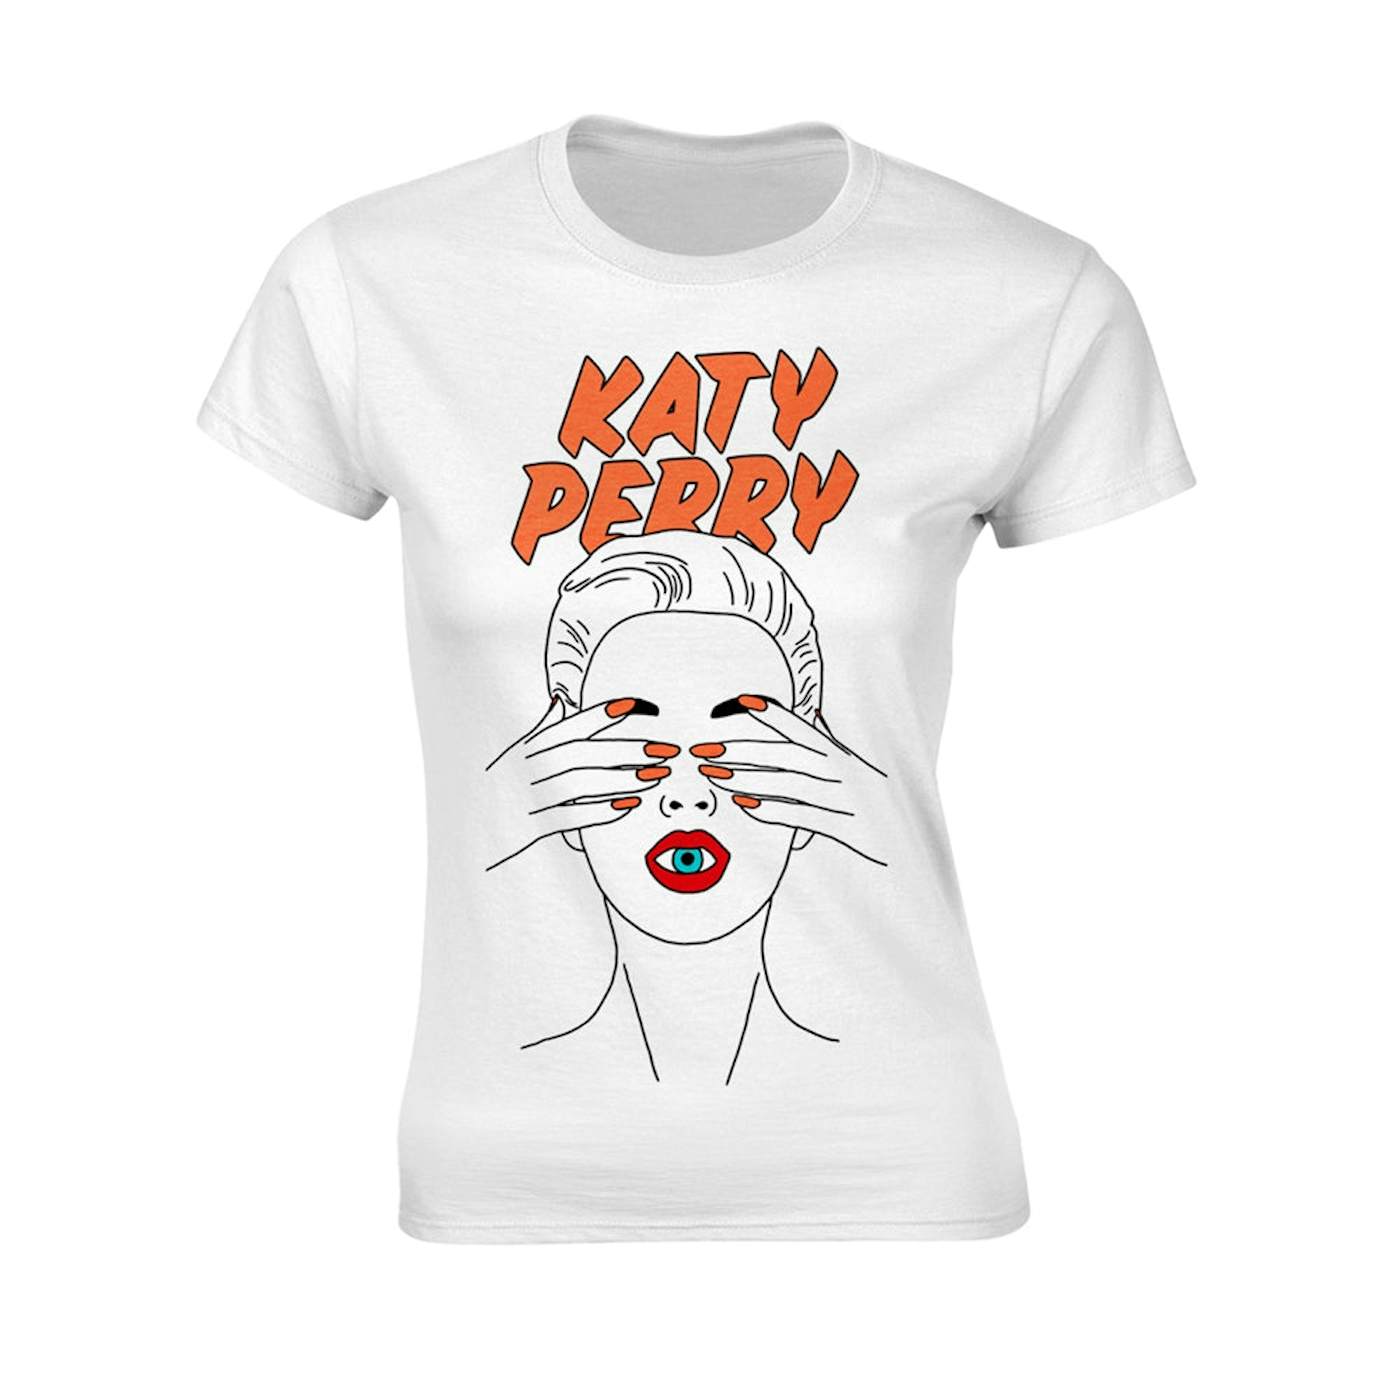 Katy Perry Women's T Shirt - Illustrated Eye